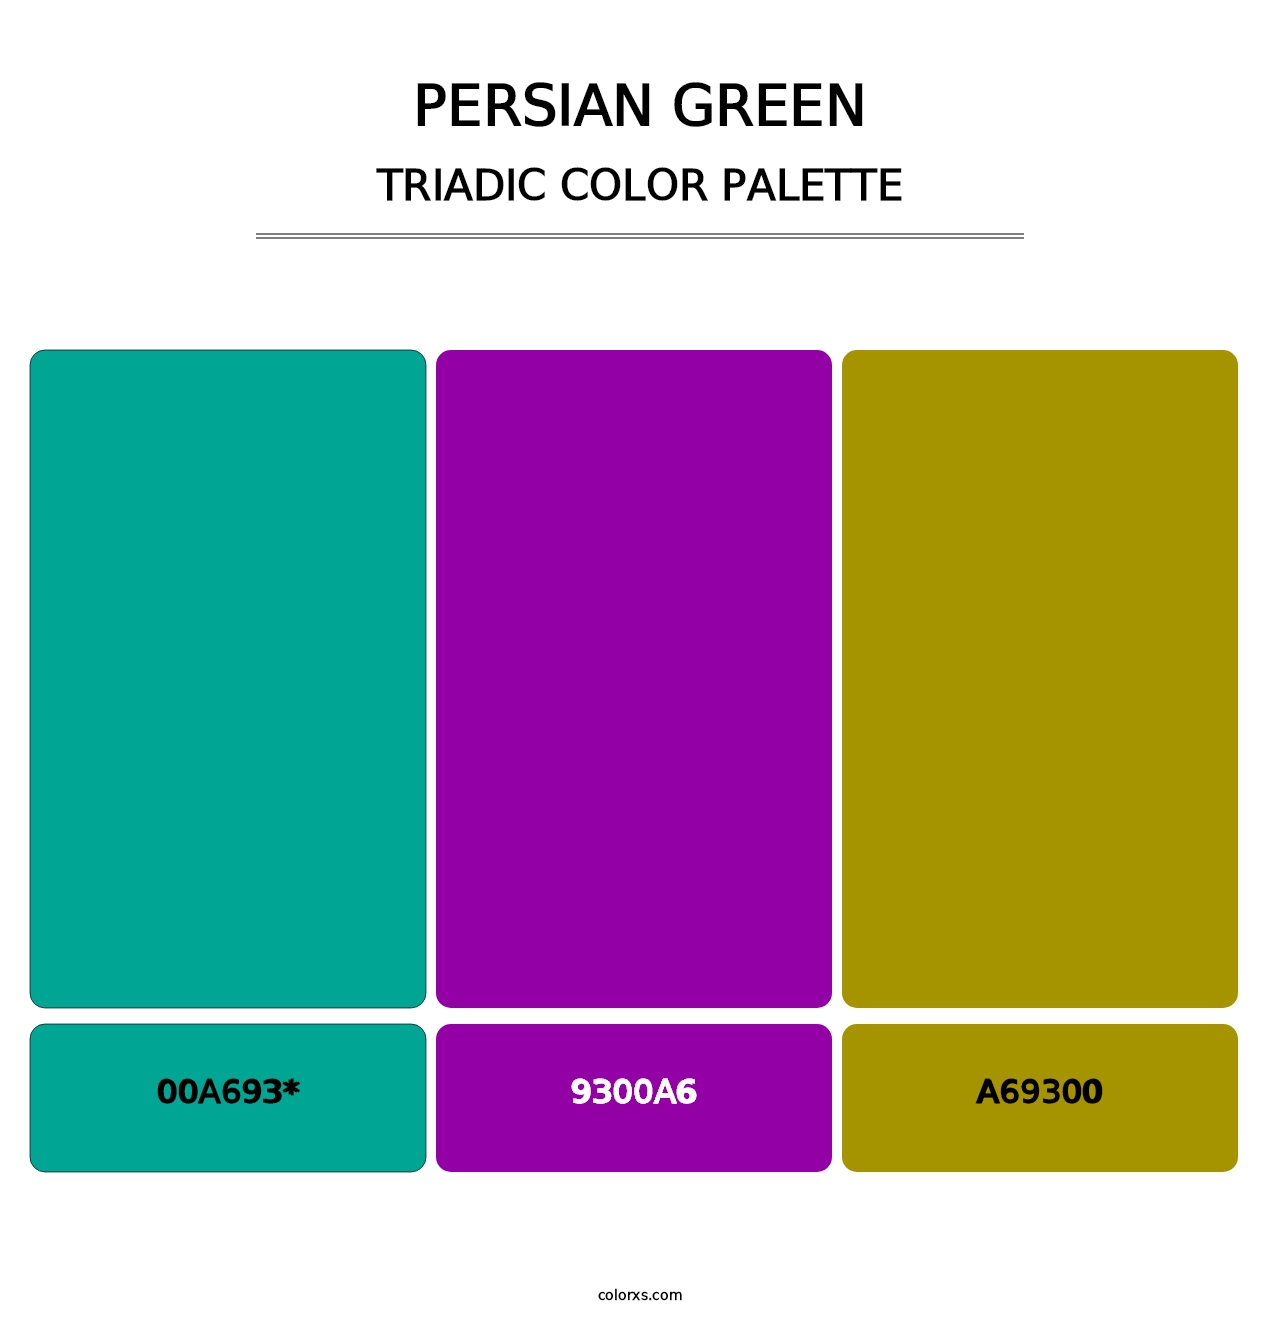 Persian Green - Triadic Color Palette